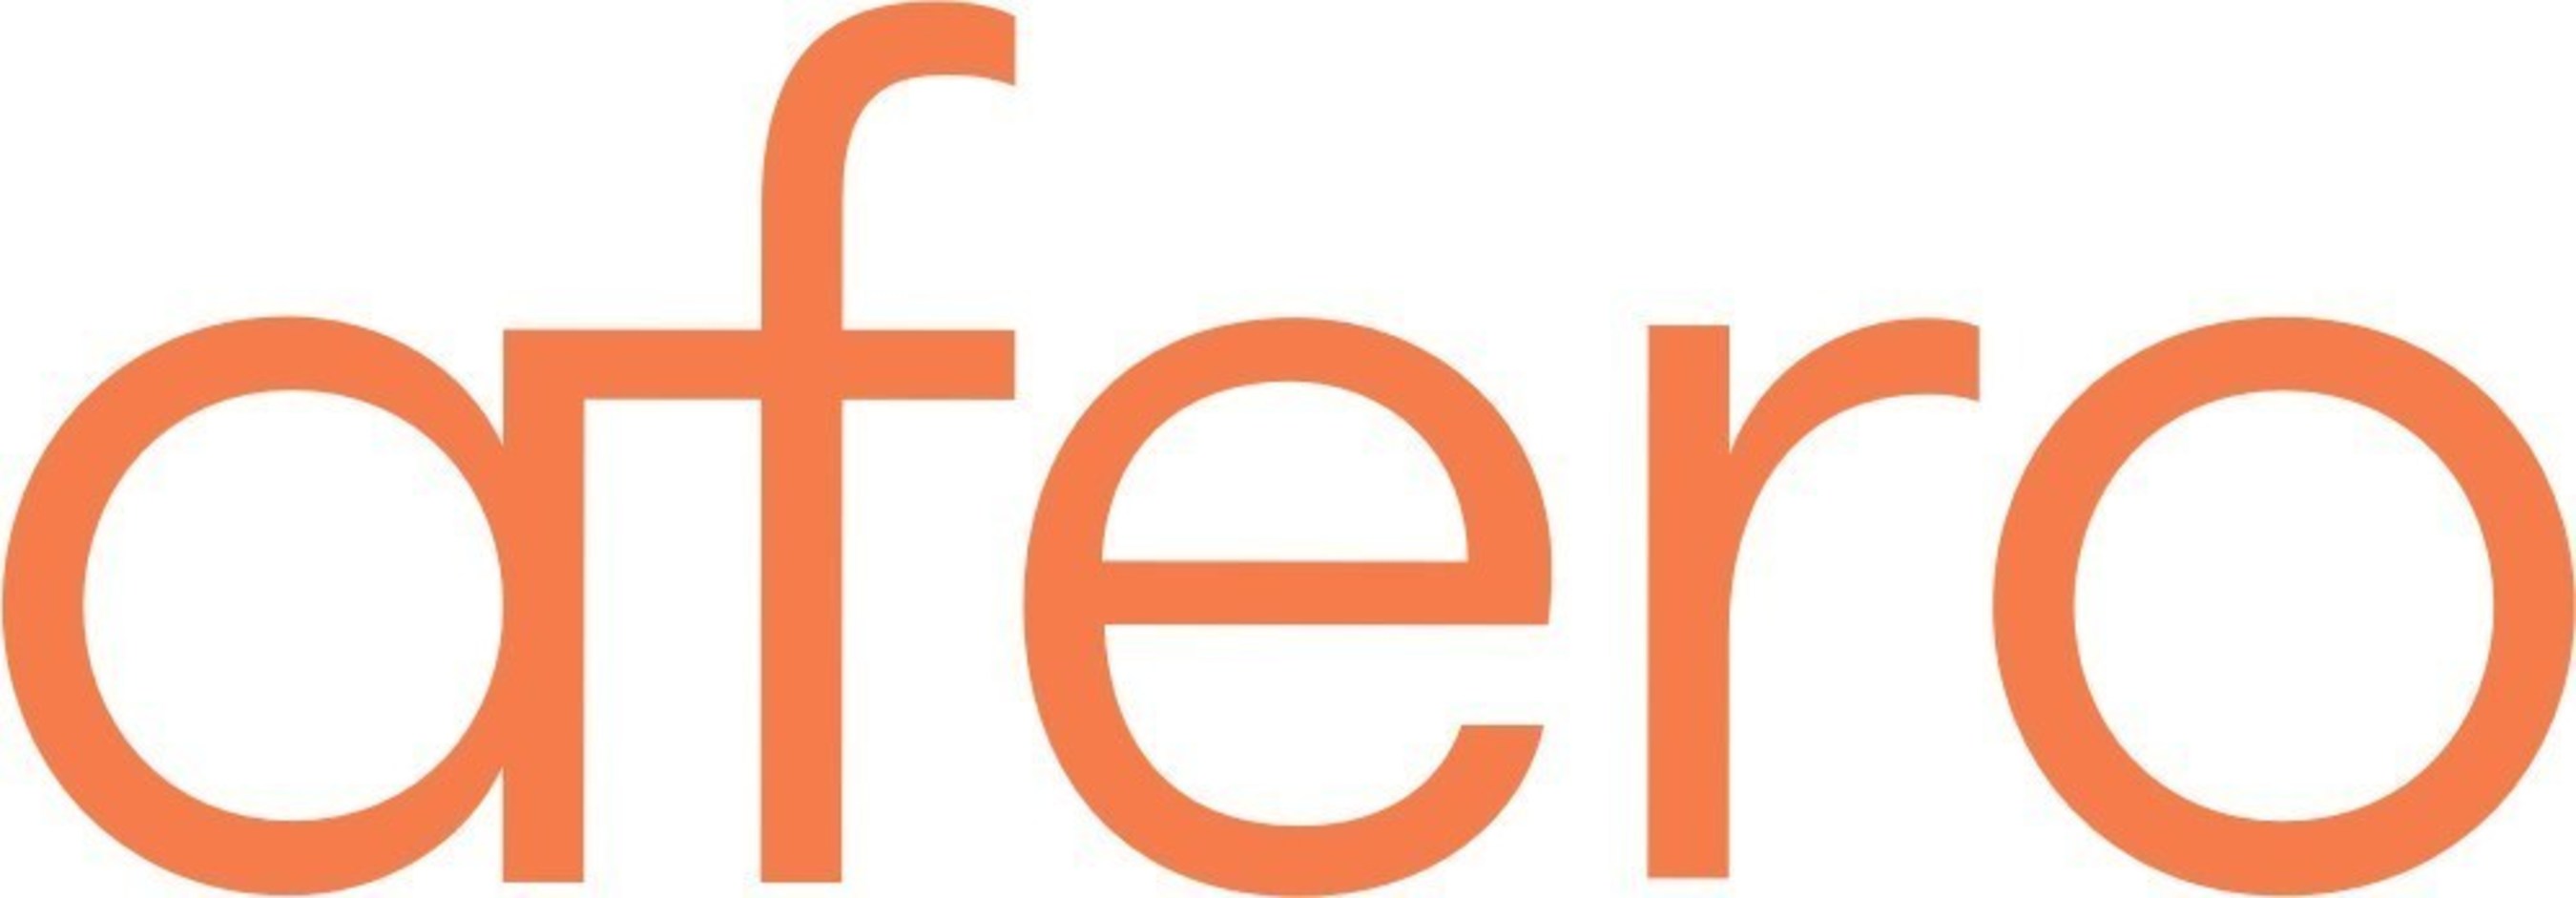 Afero, the platform bringing secure connectivity to the Internet of Things for both enterprises and the home, has raised $20.3 million in Series A financing.